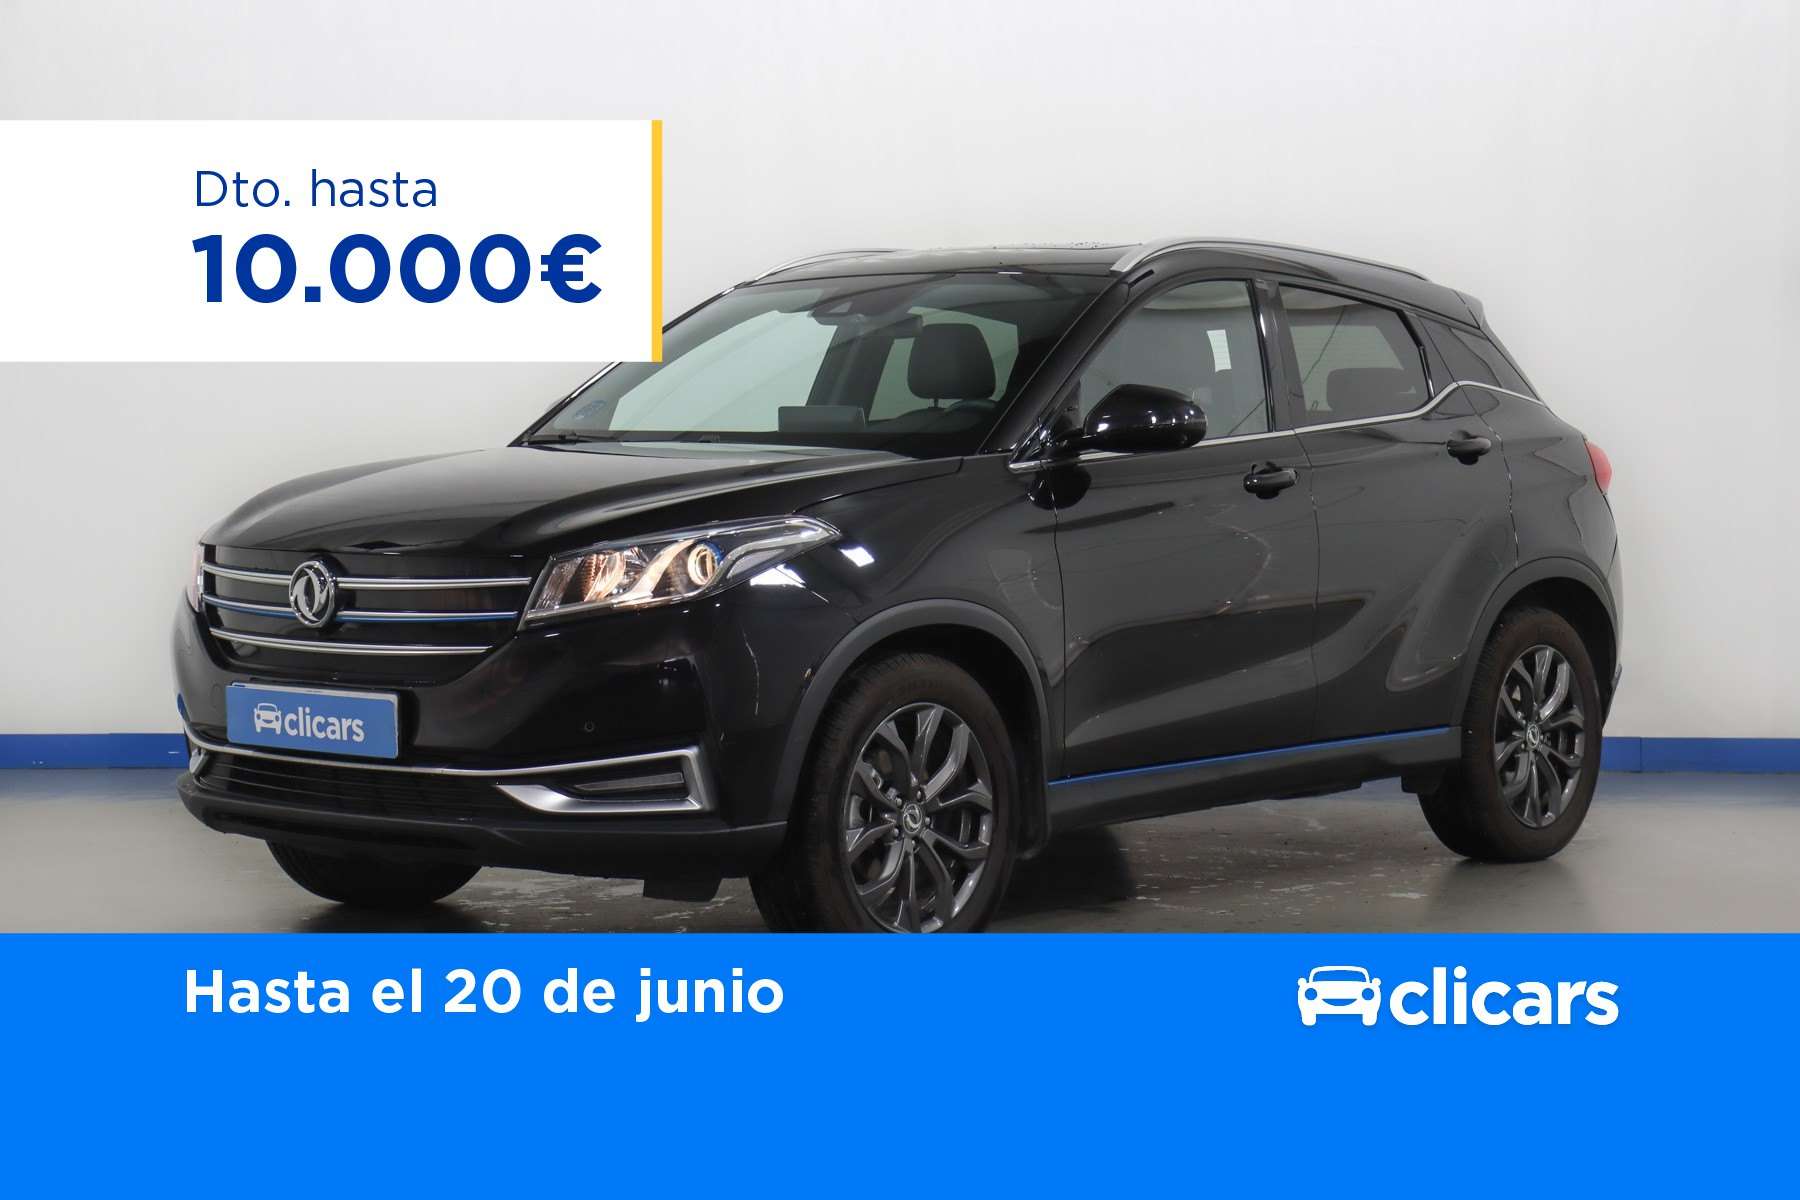 DFSK Seres 3 Off-Road/Pick-up in Black used in MADRID for € 27,290.-